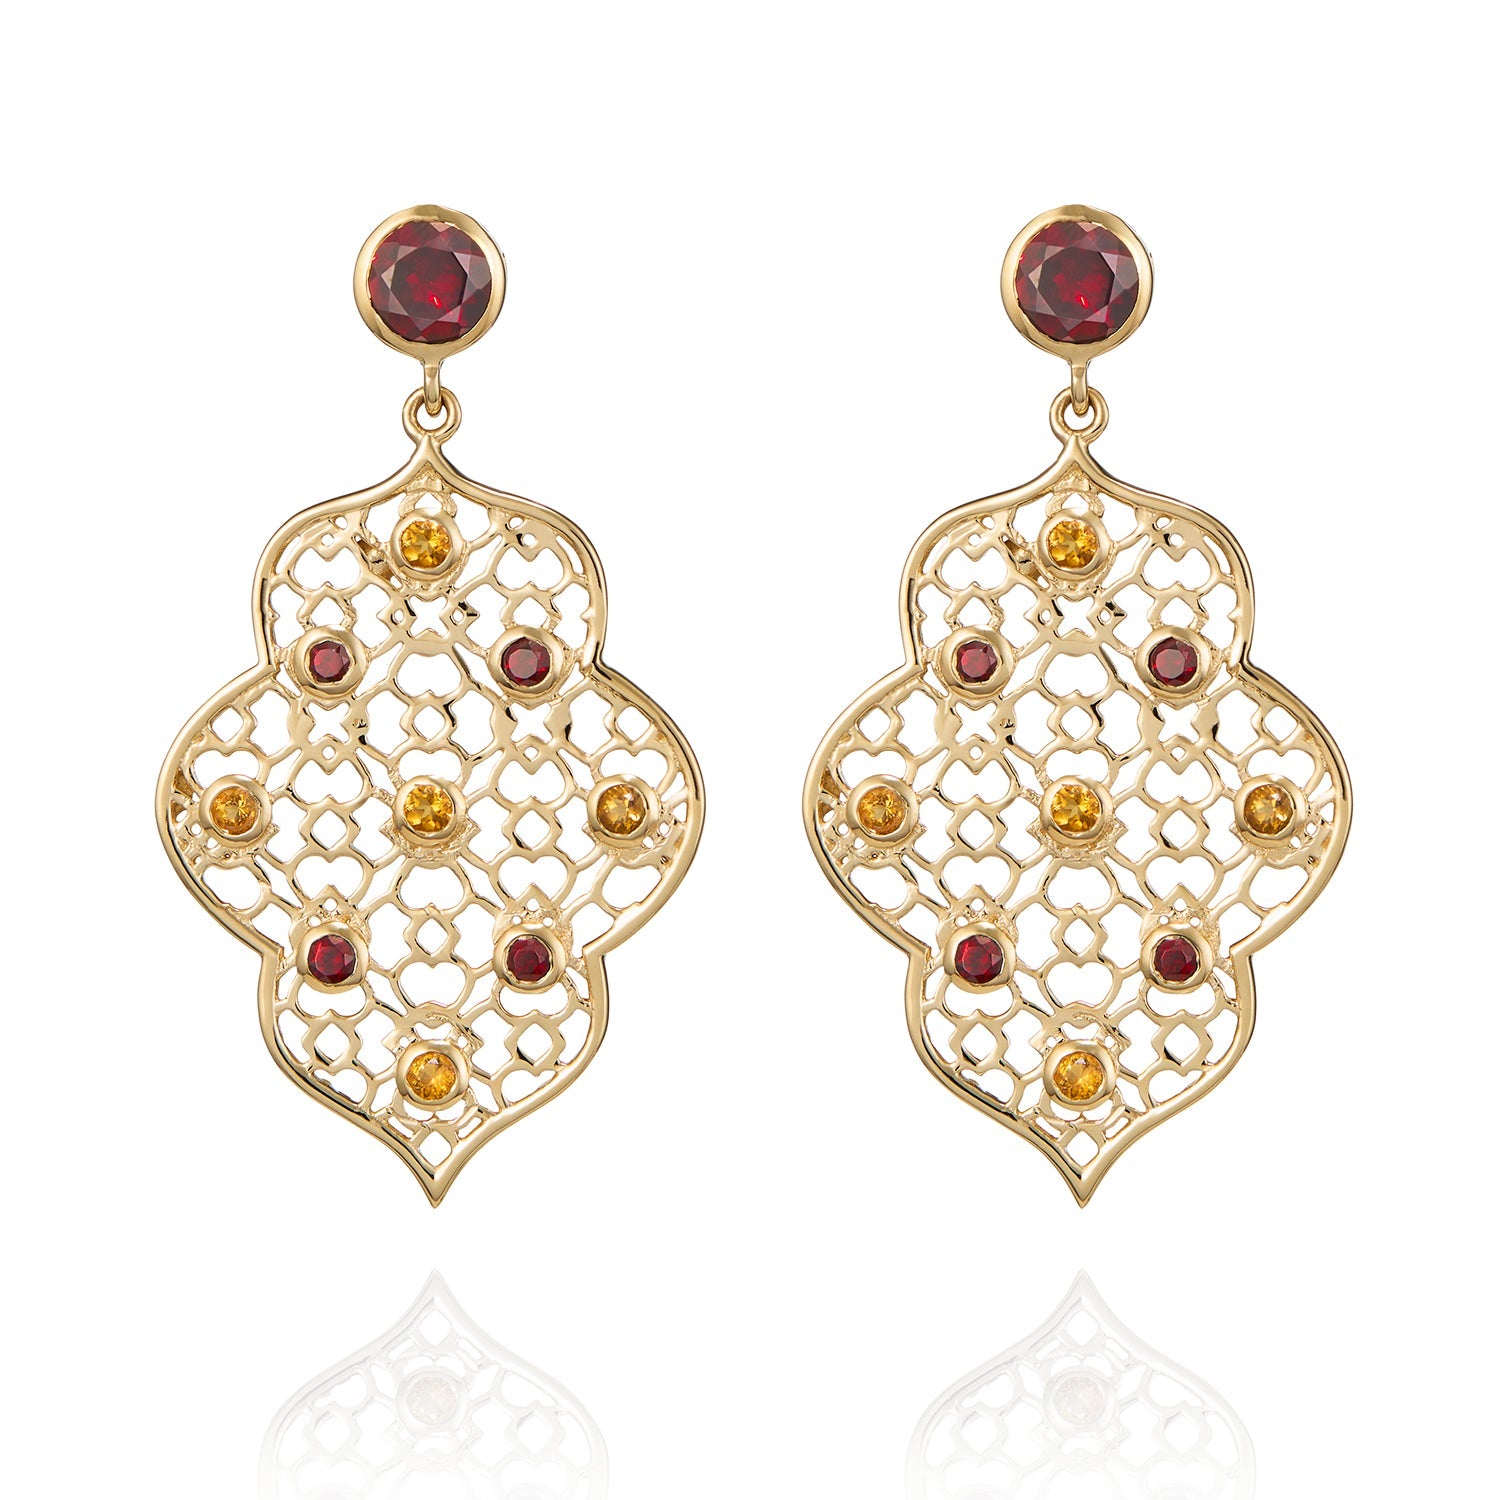 Gold Filigree Earrings from The Andalusian Collection by Augustine Jewels